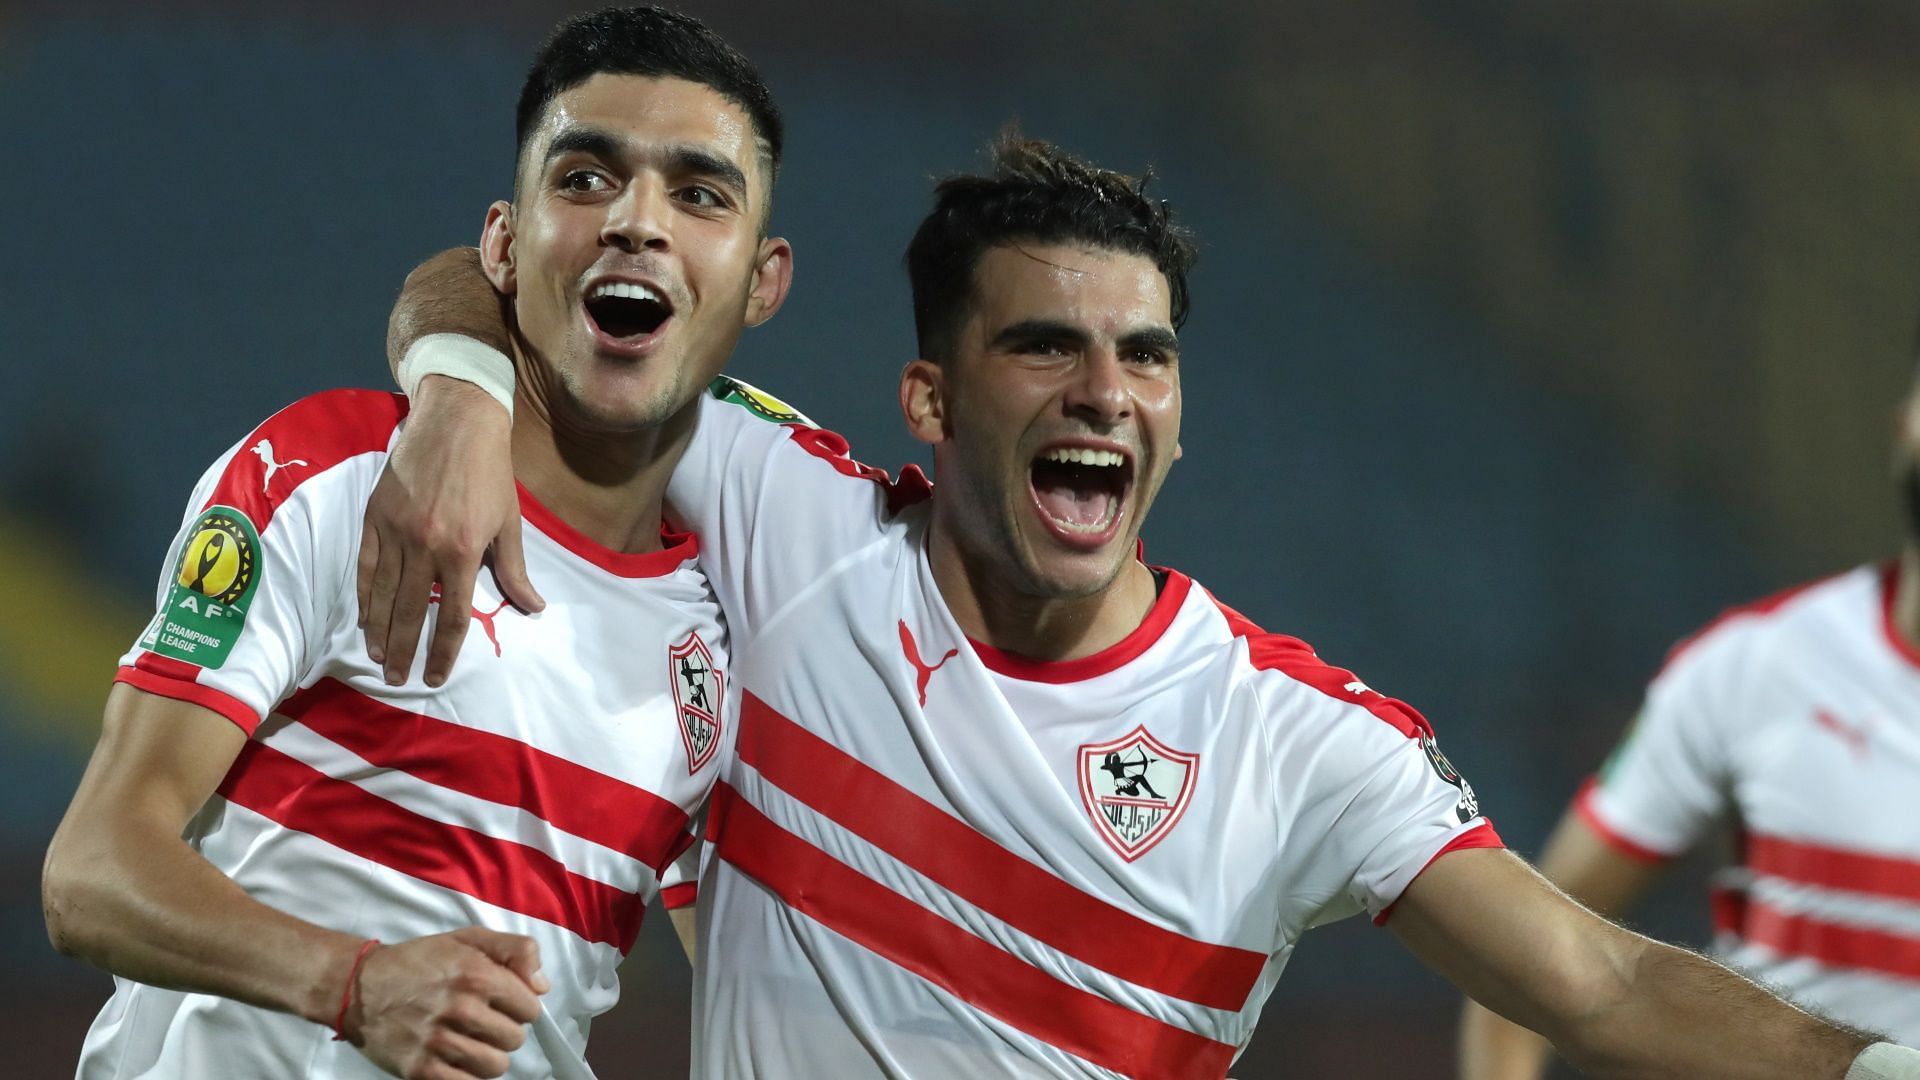 Zamalek FC face Wydad Casablanca in their upcoming CAF Champions League fixture on Saturday